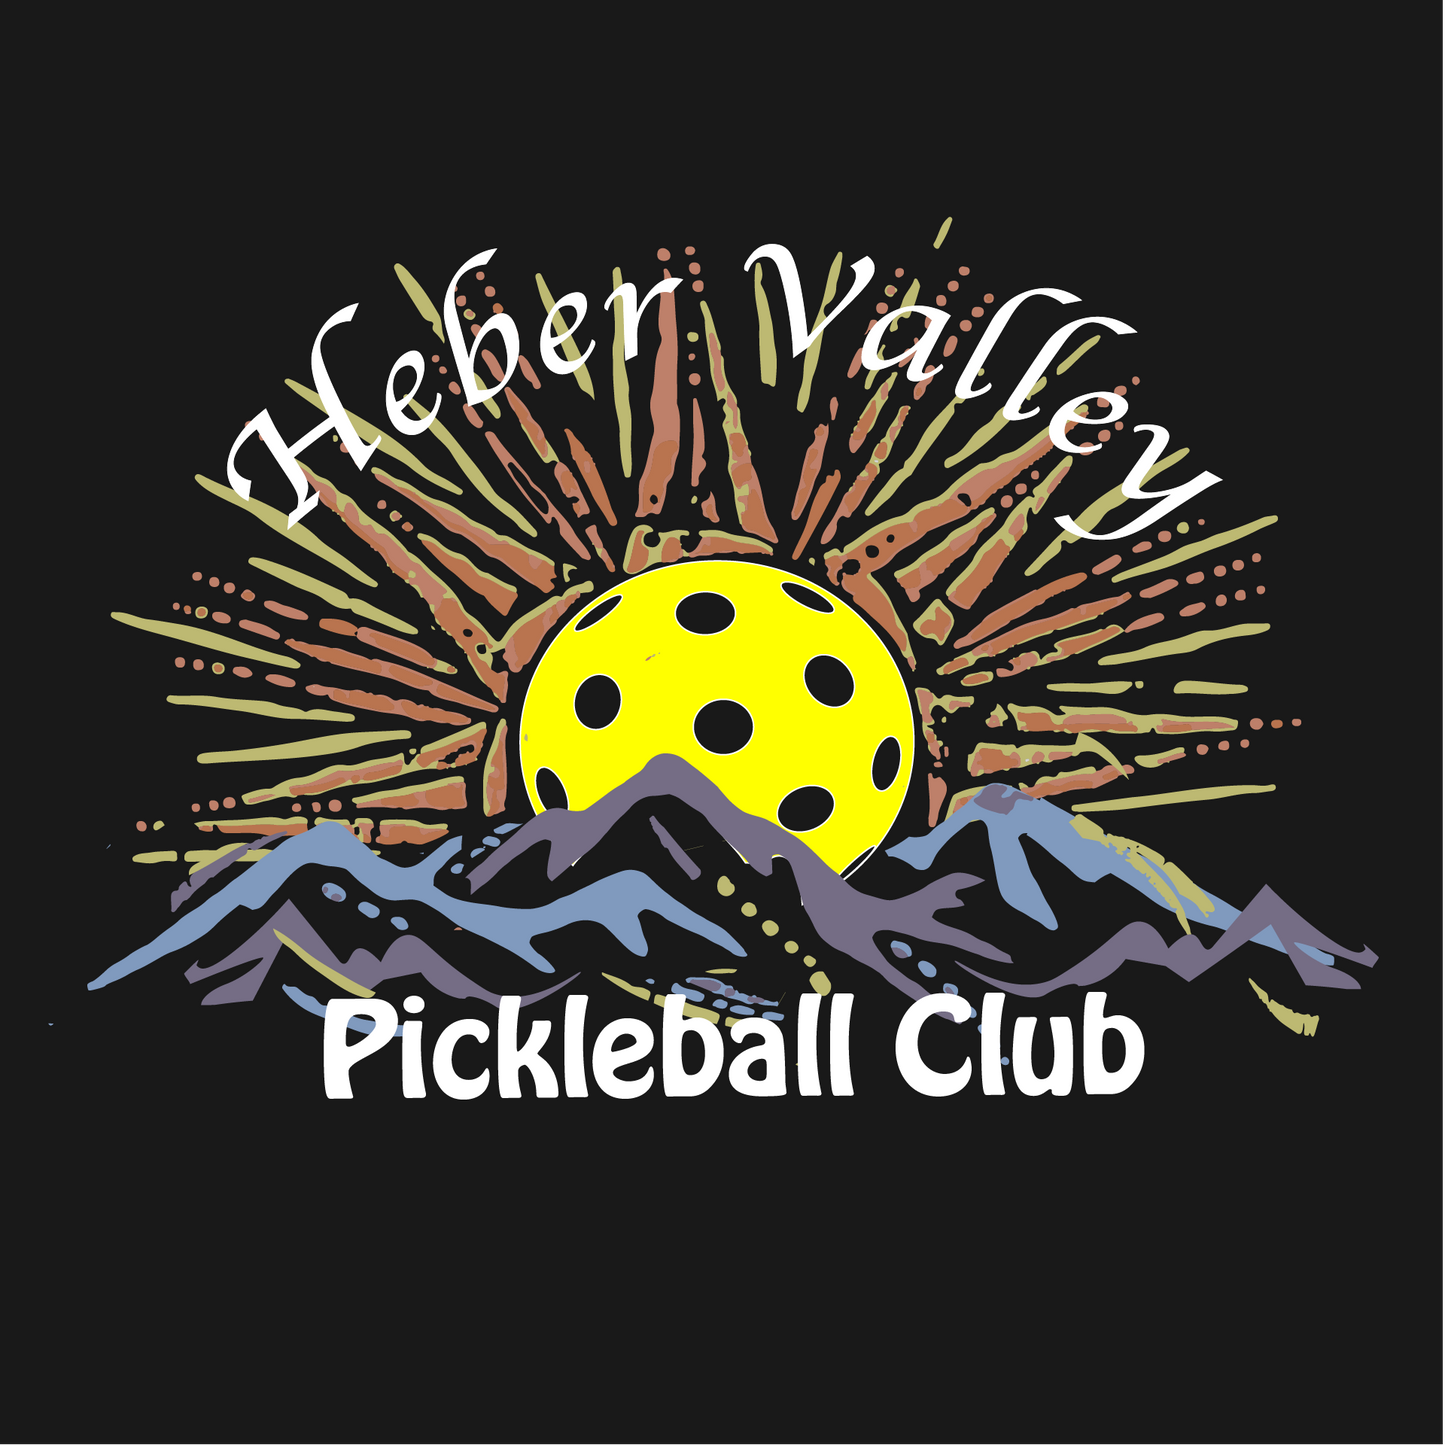 Heber Valley Pickleball Club (Small) | Women's Long Sleeve Scoop Neck Pickleball Shirts | 75/13/12 poly/cotton/rayon